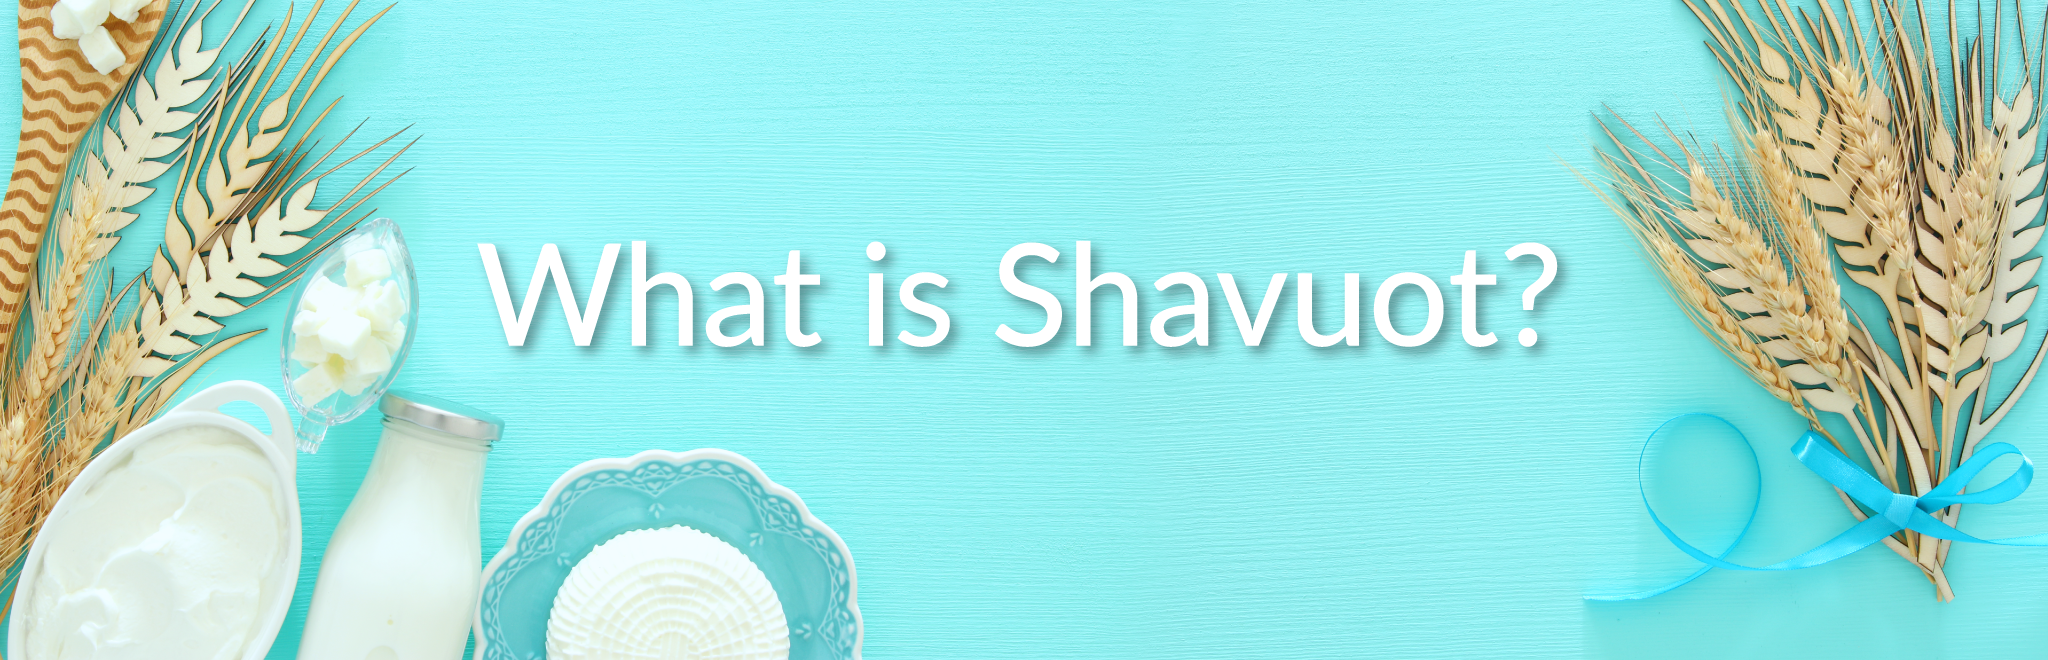 what_is_shavuot